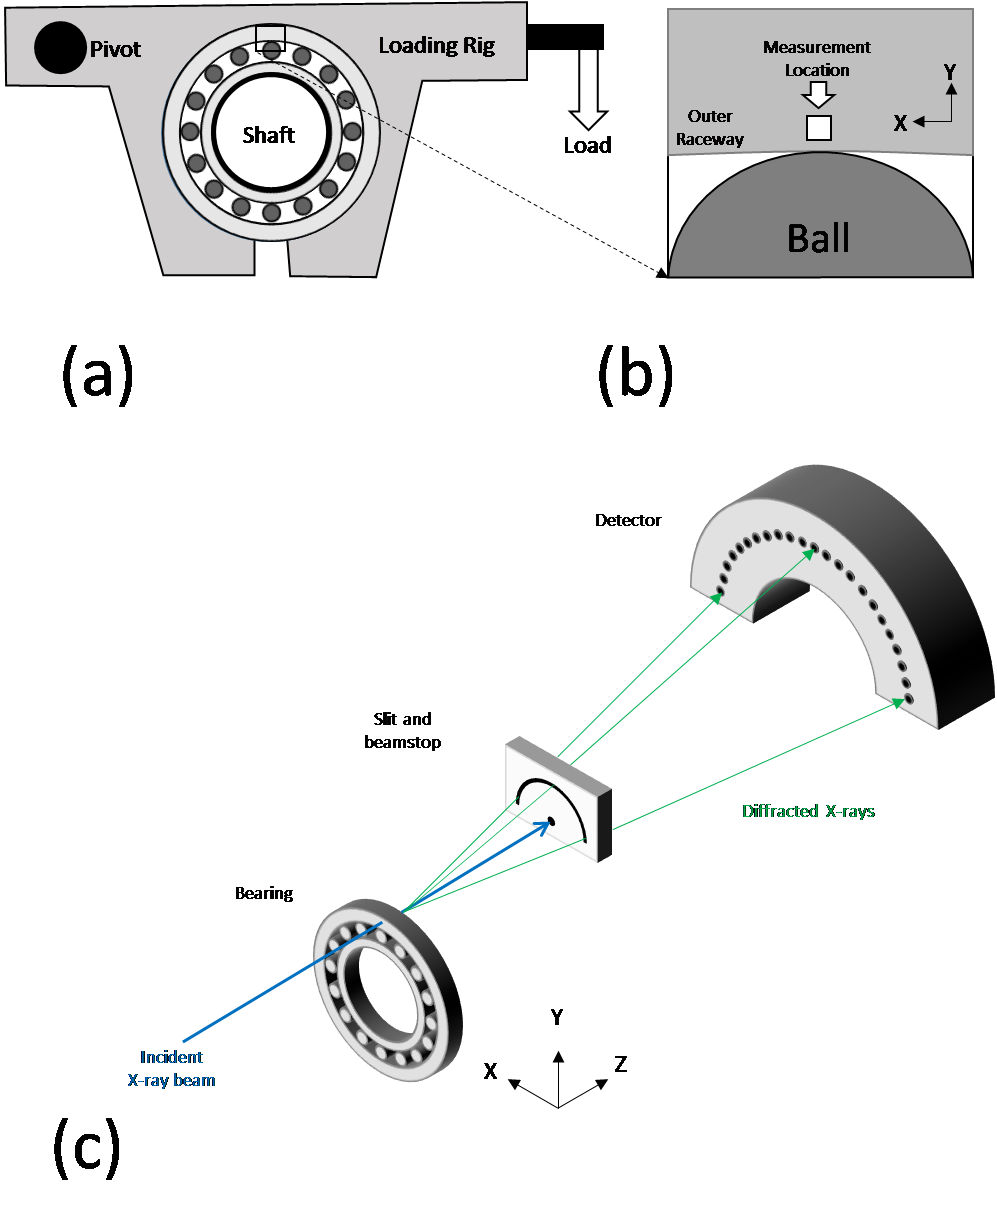 Figure 1: Schematic of the test setup. (a) Bearing in loading rig. (b) Detail showing X-ray strain measurement location. (c) Energy-dispersive X-ray detector.